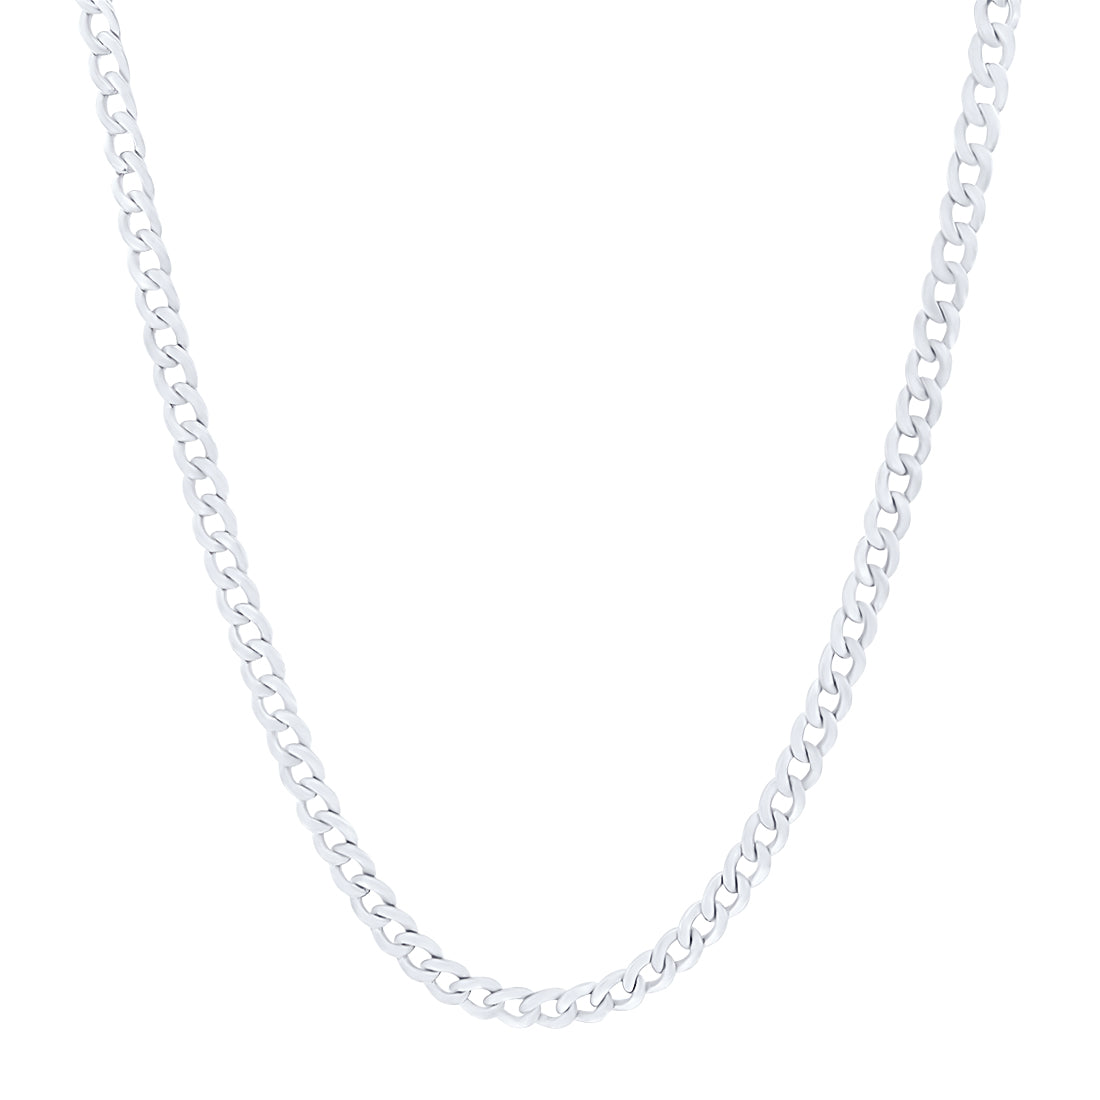 Curb Chain Necklace in 9ct White Gold Silver Infused 55cm Necklaces Bevilles 